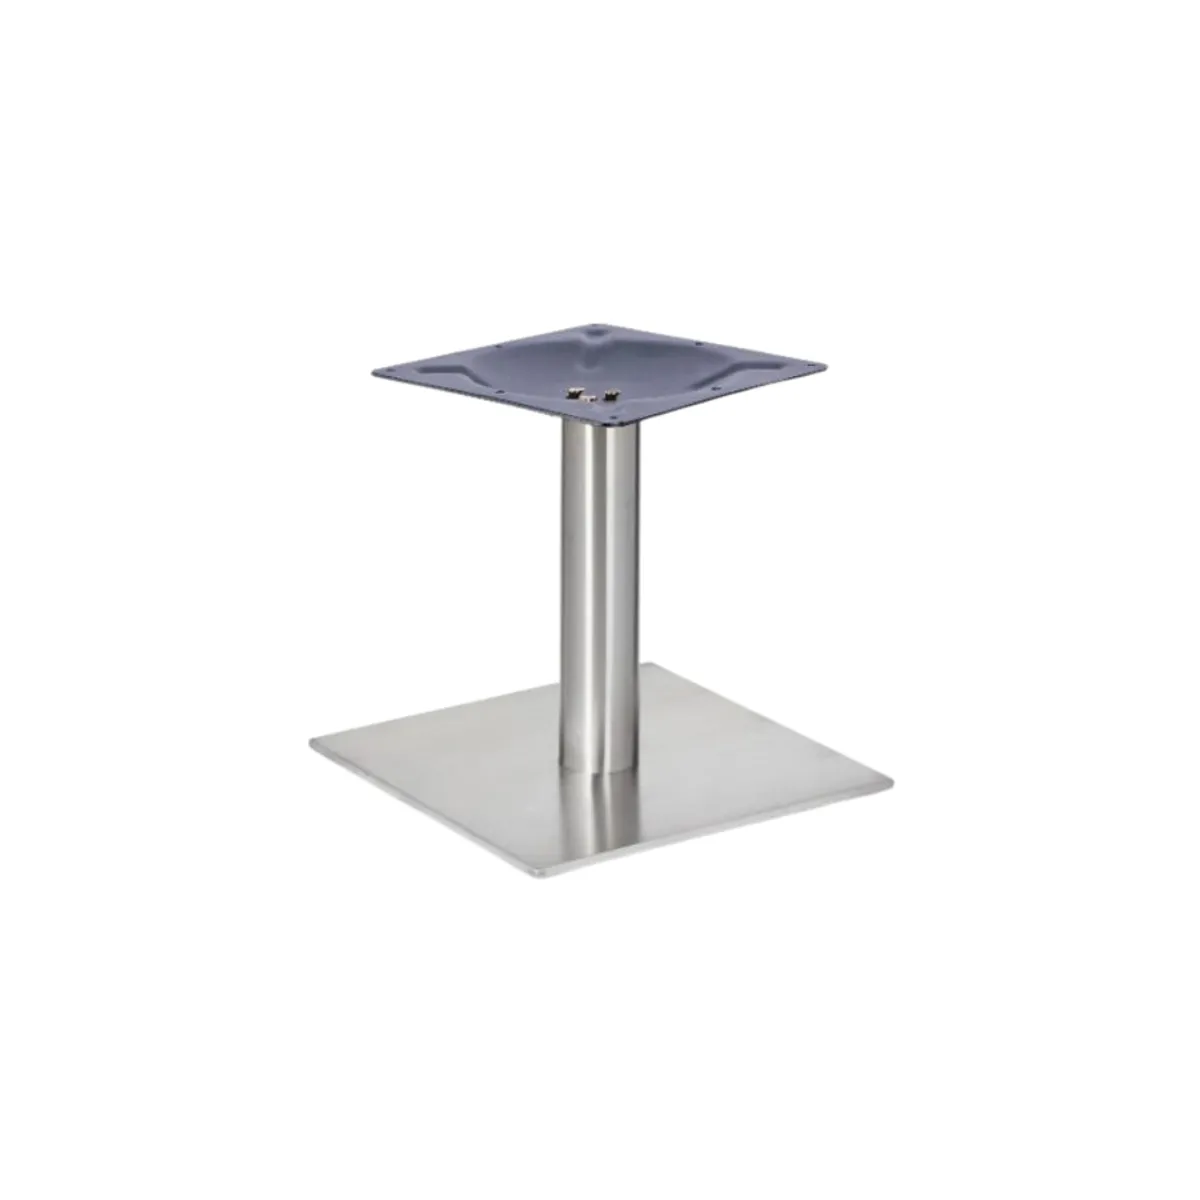 Flat square table base with round column 5